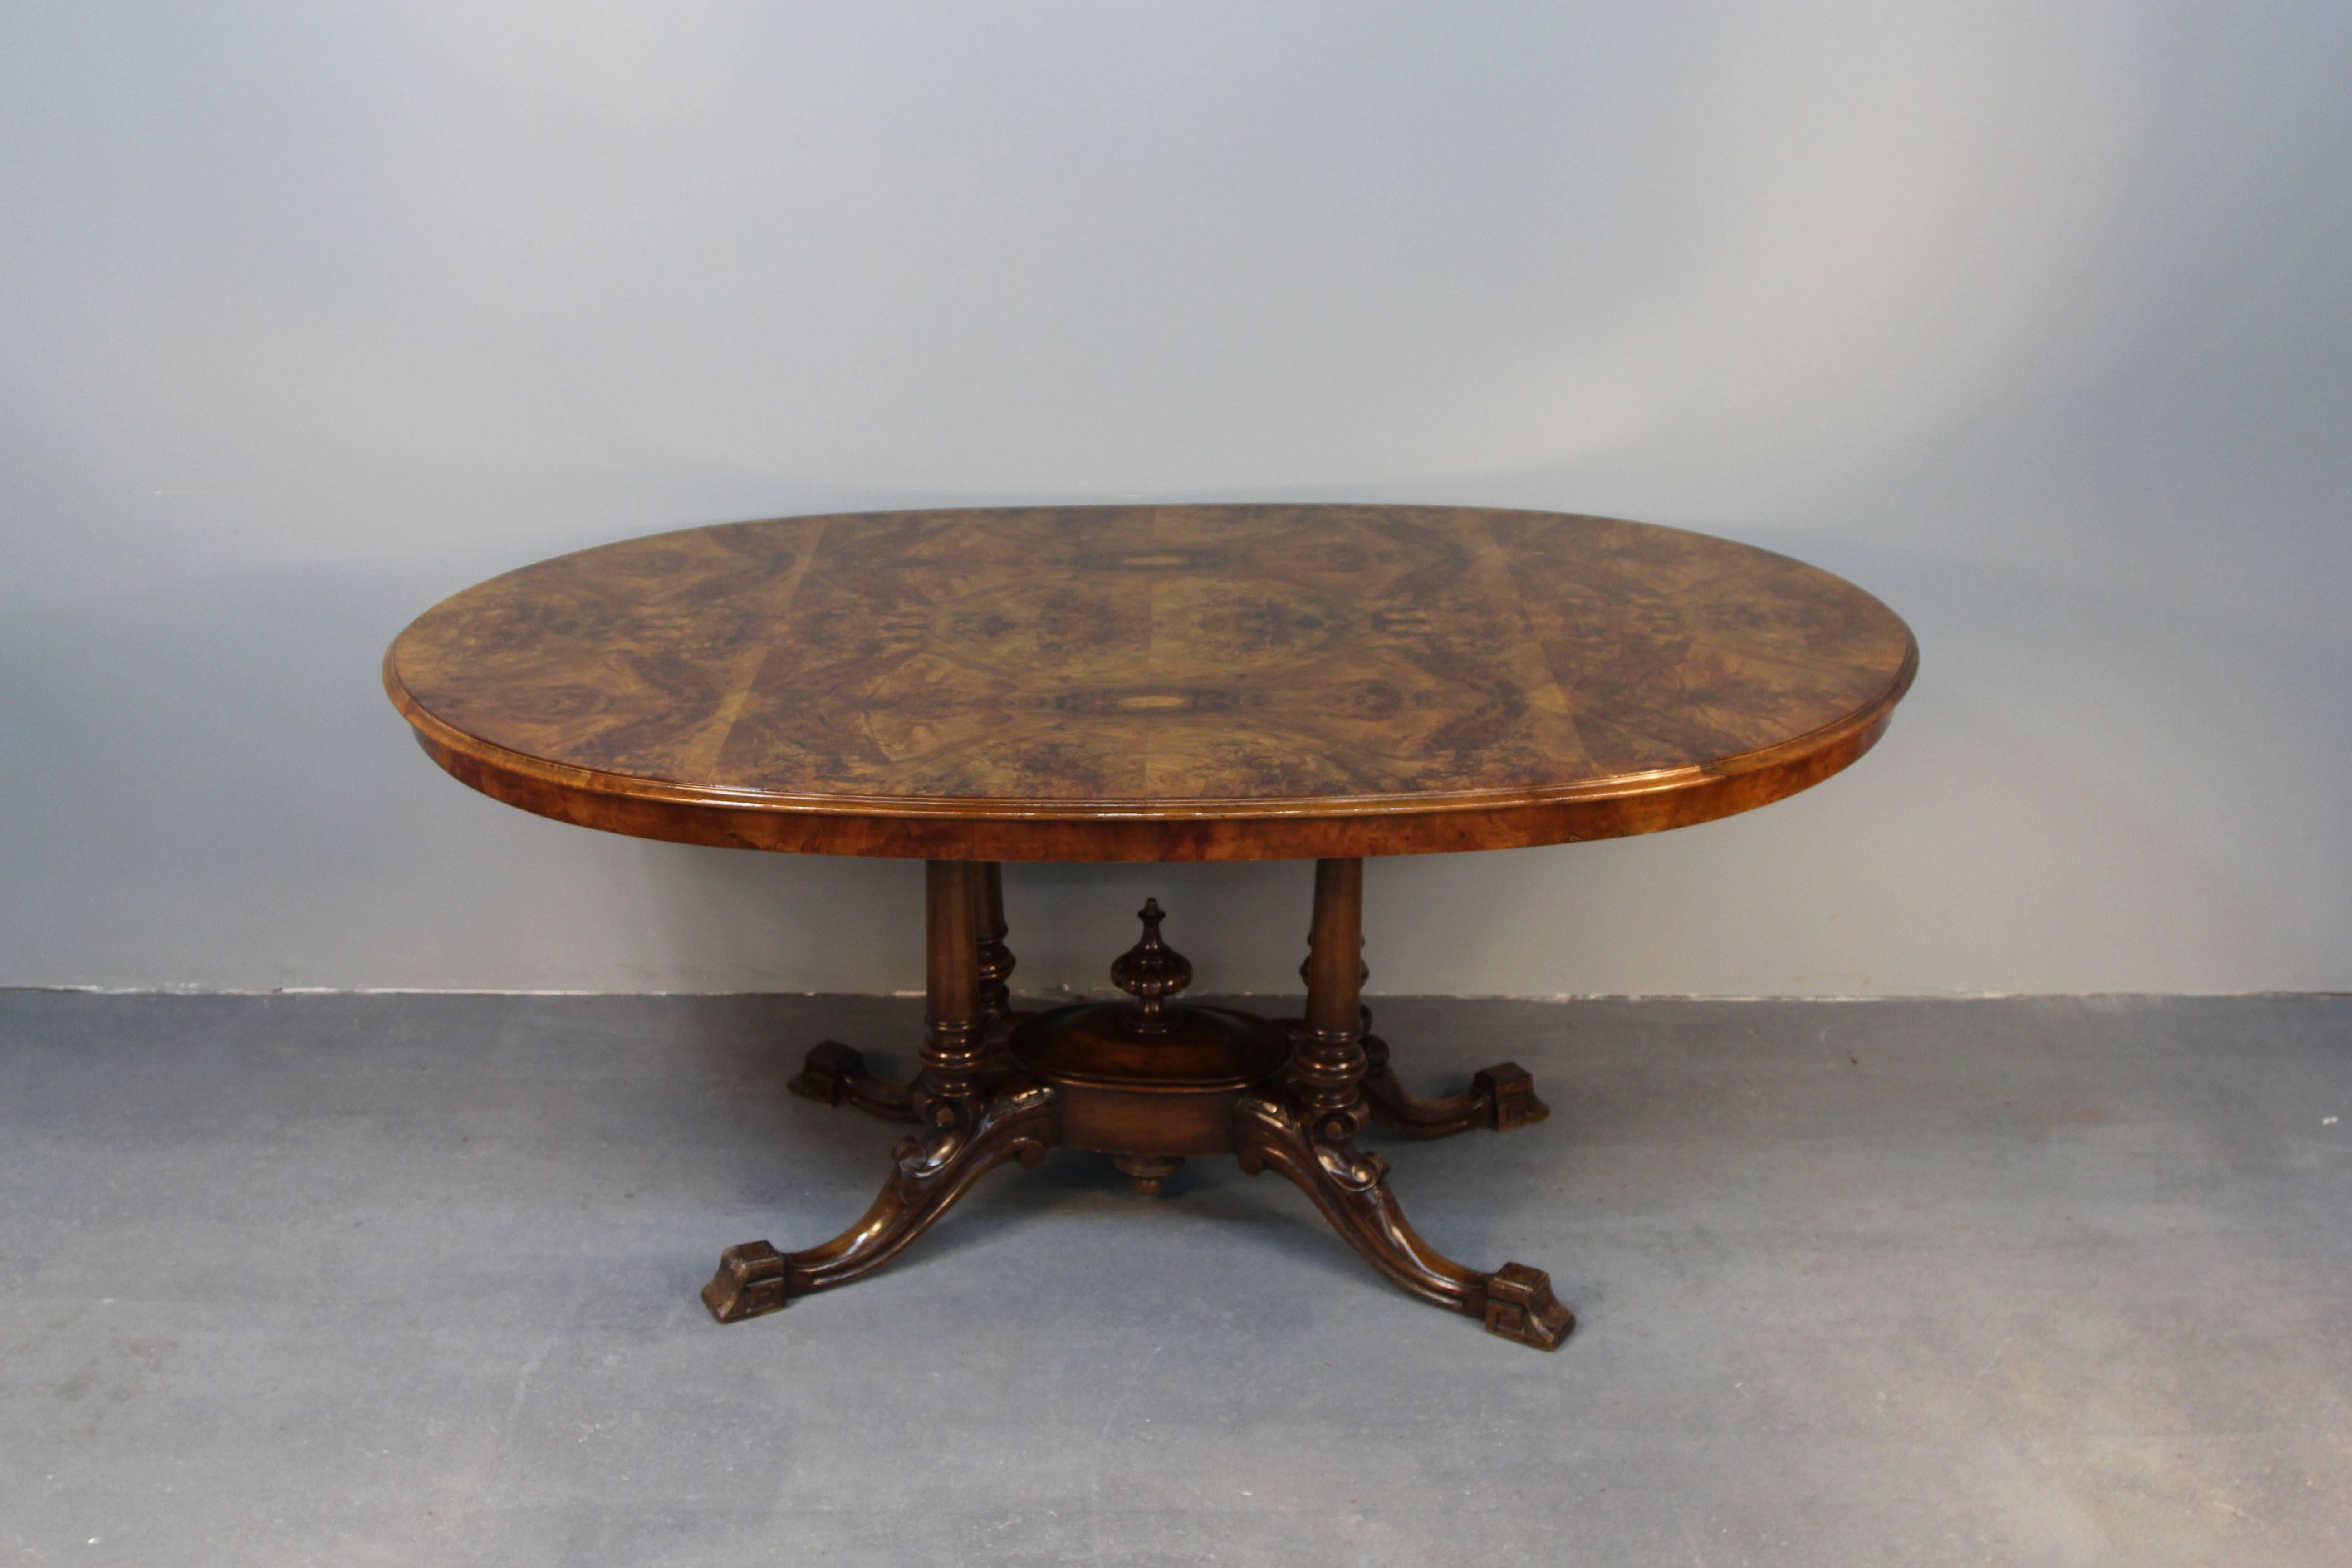 Oval vintage walnut dining table with burled walnut top. Perfect for six comfortably.